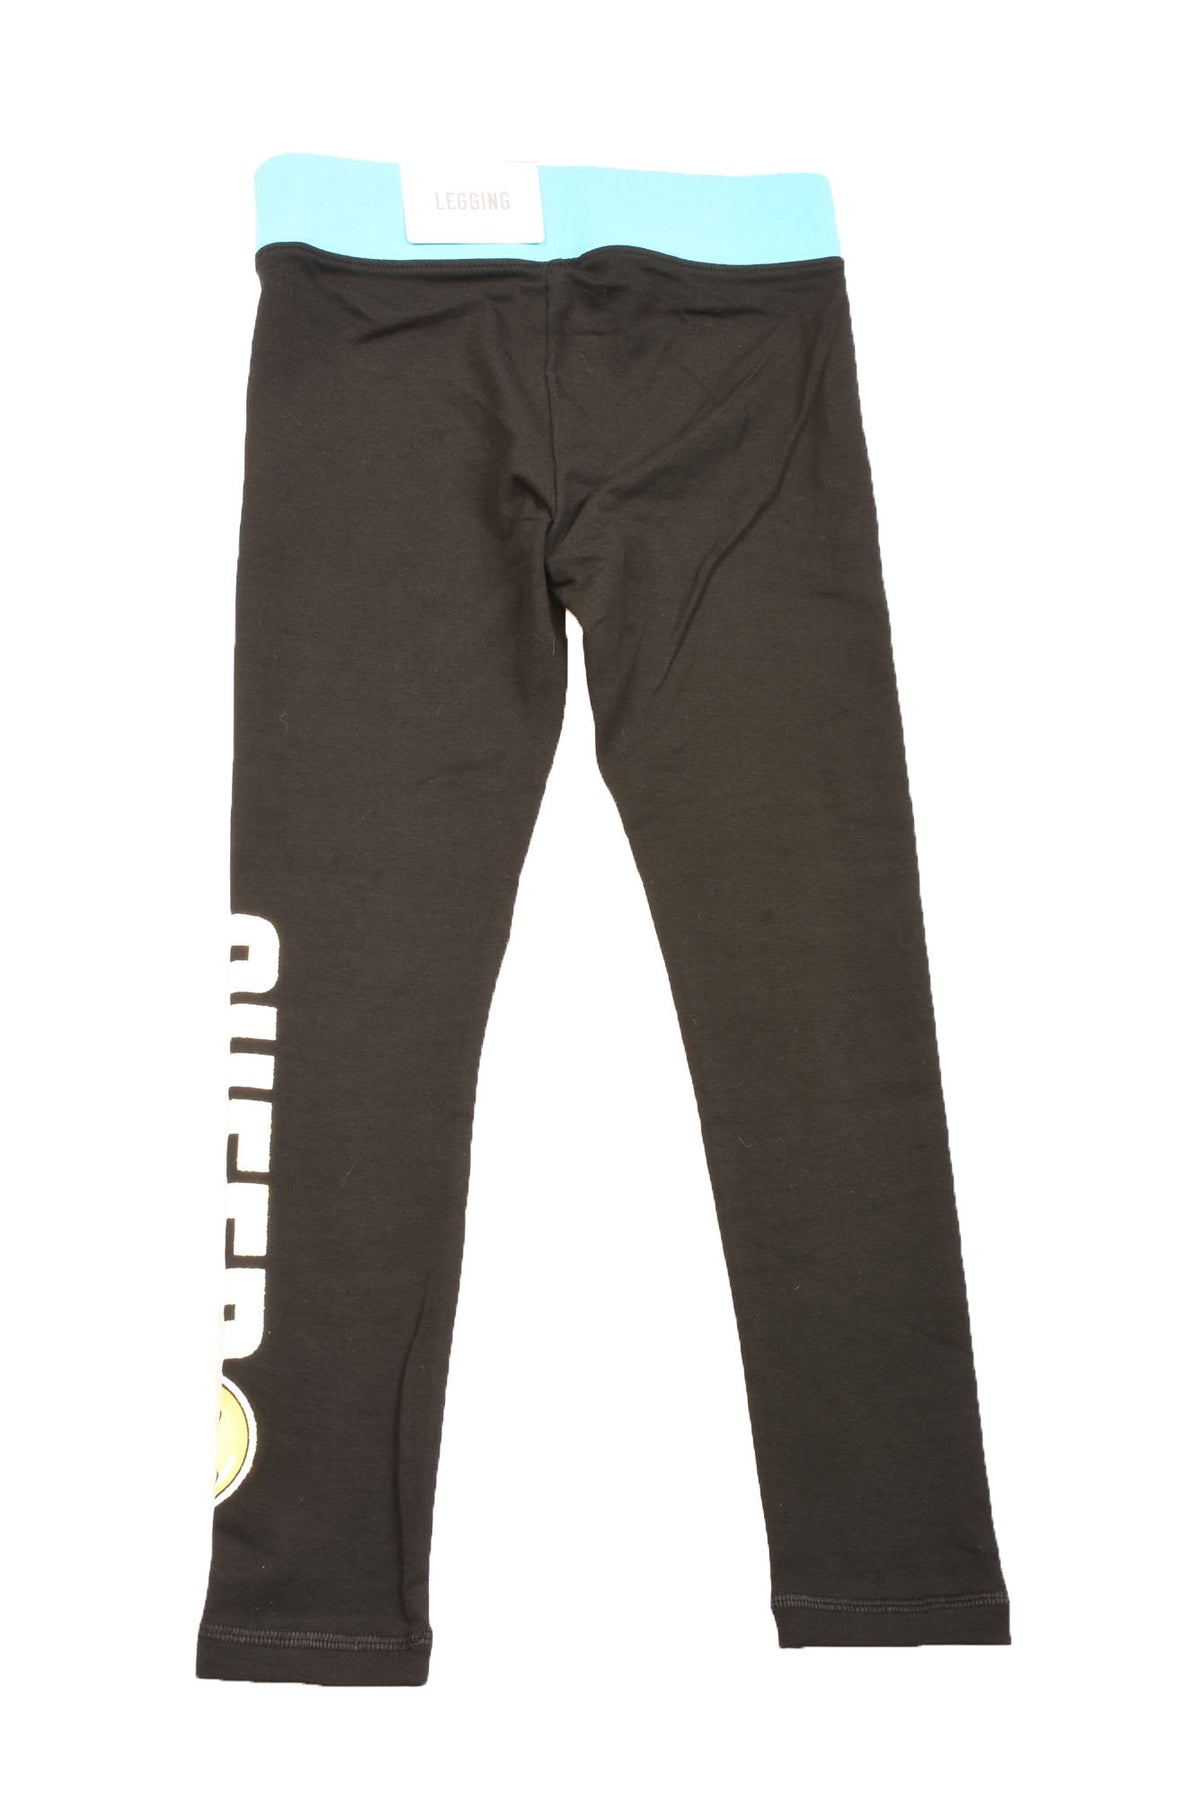 Justice Active Size 7 Girl&#39;s Active Legging